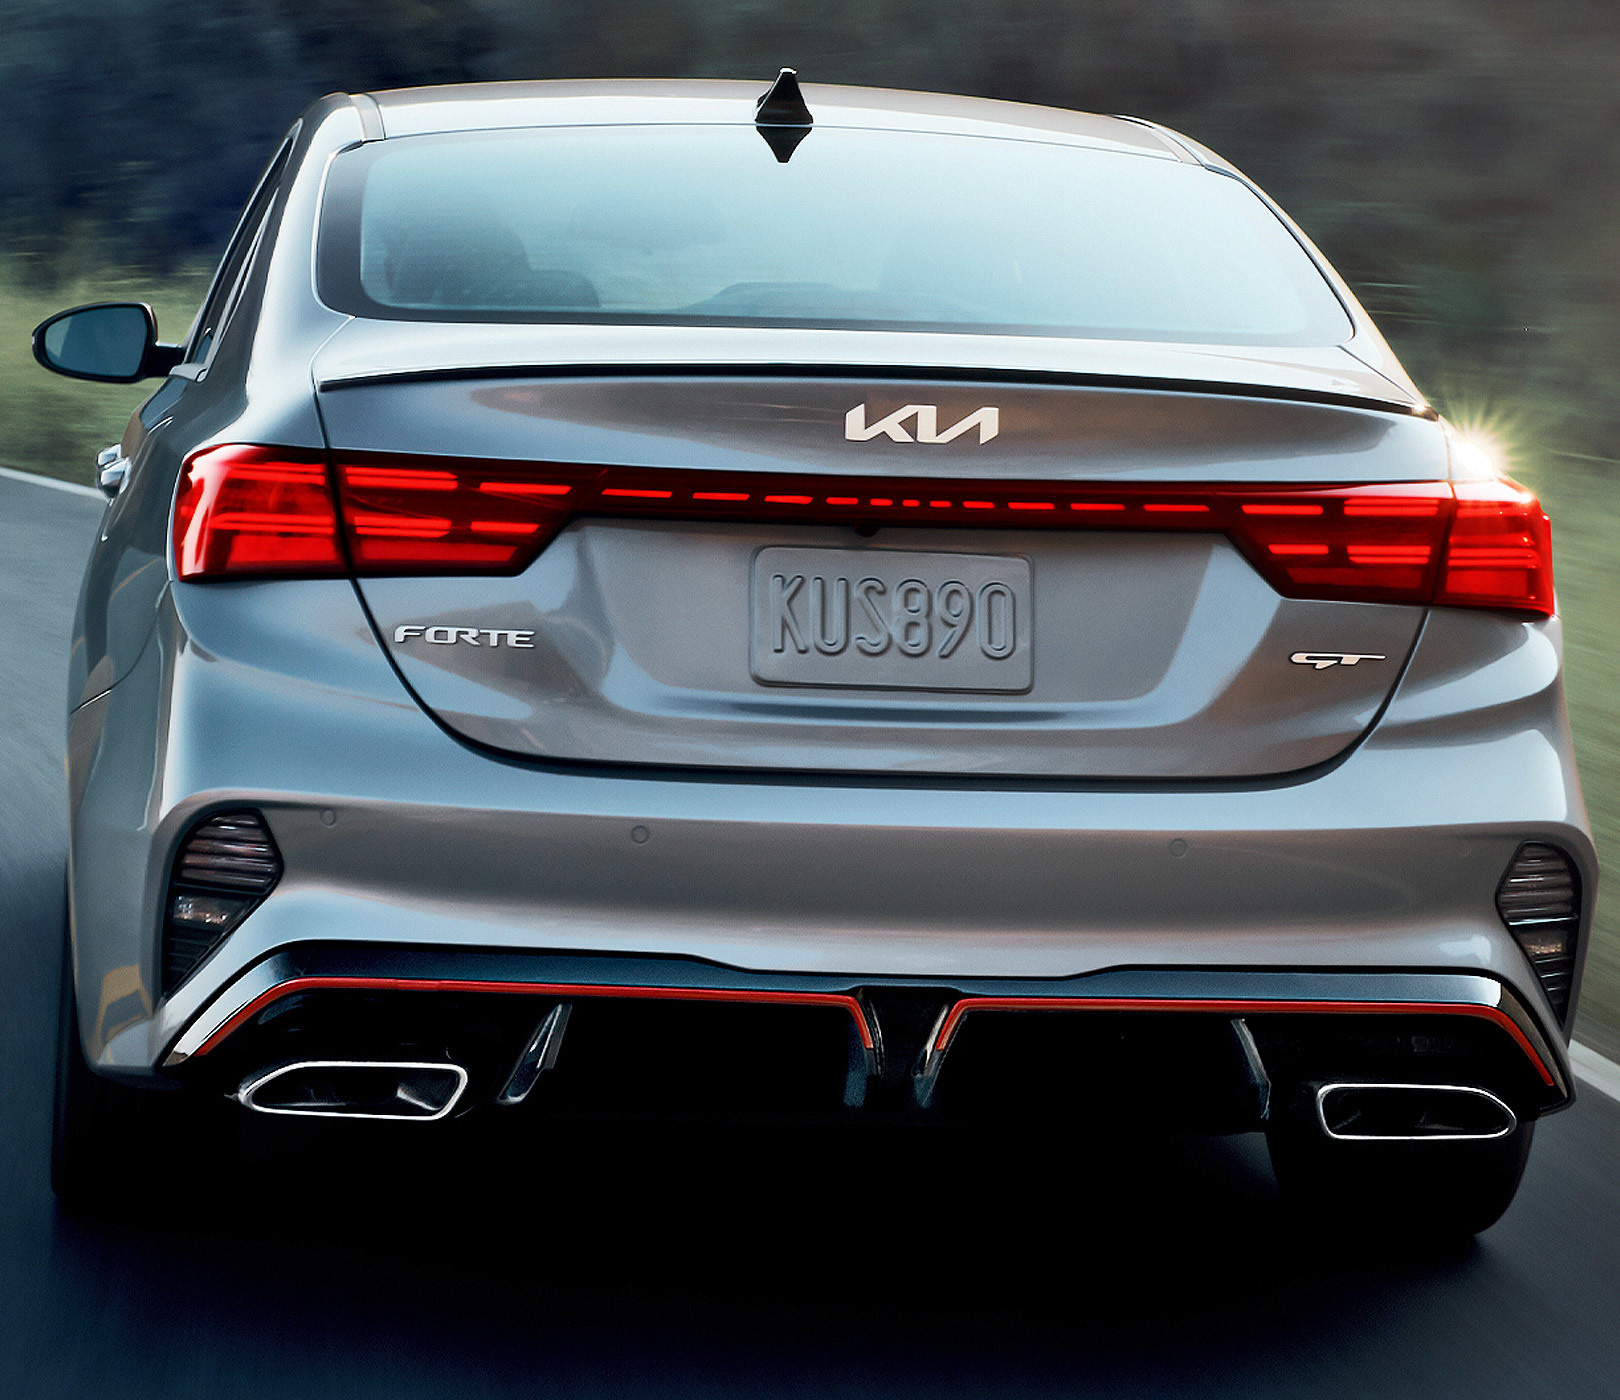 2023 Kia Forte Driving With LED Tail Lights Rear View